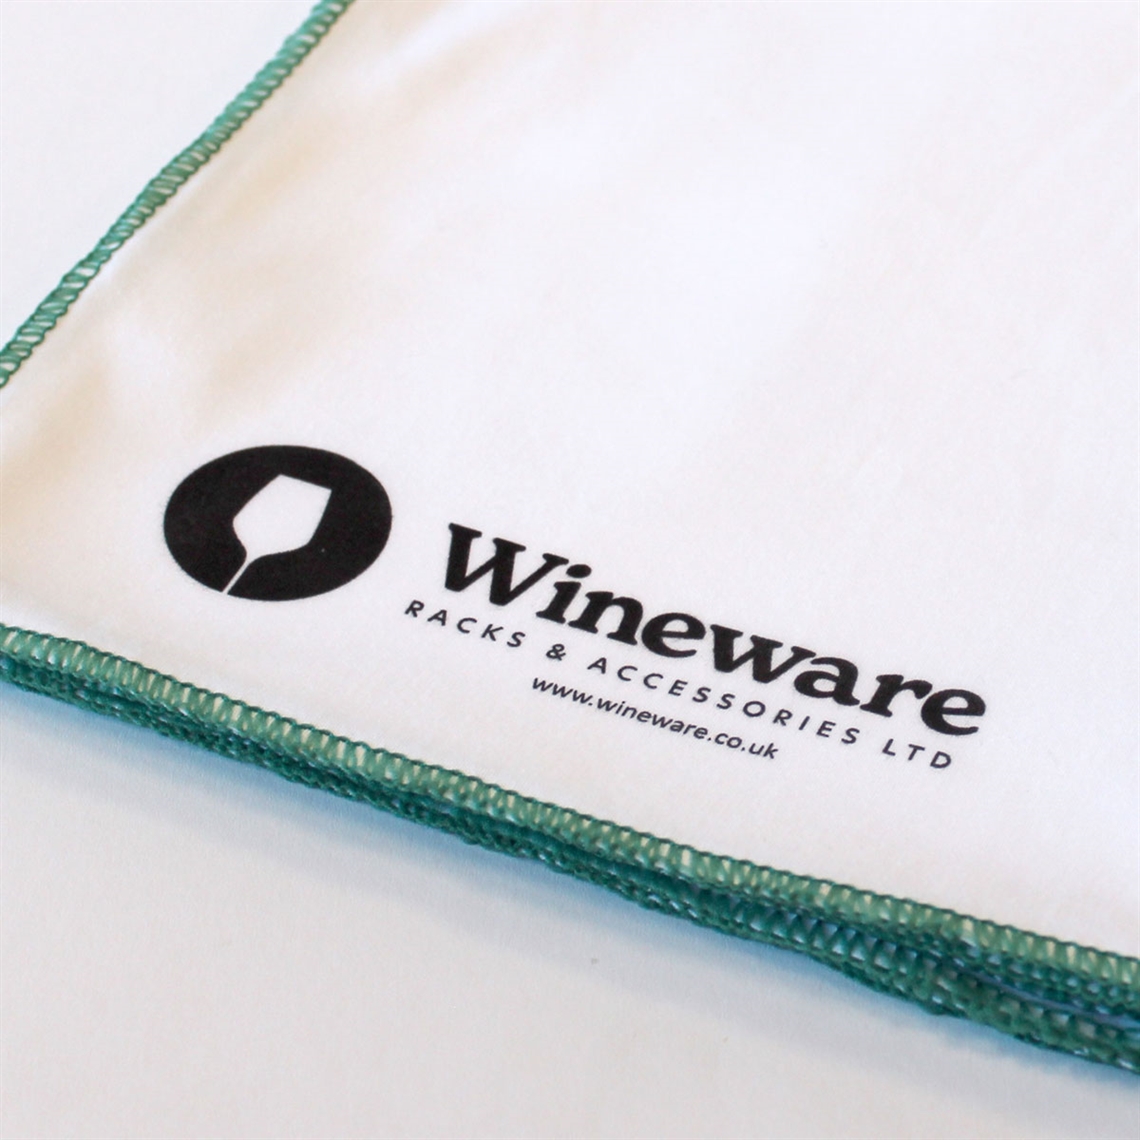 View more beginners guide to wine decanting from our Wine Decanter Cleaning range